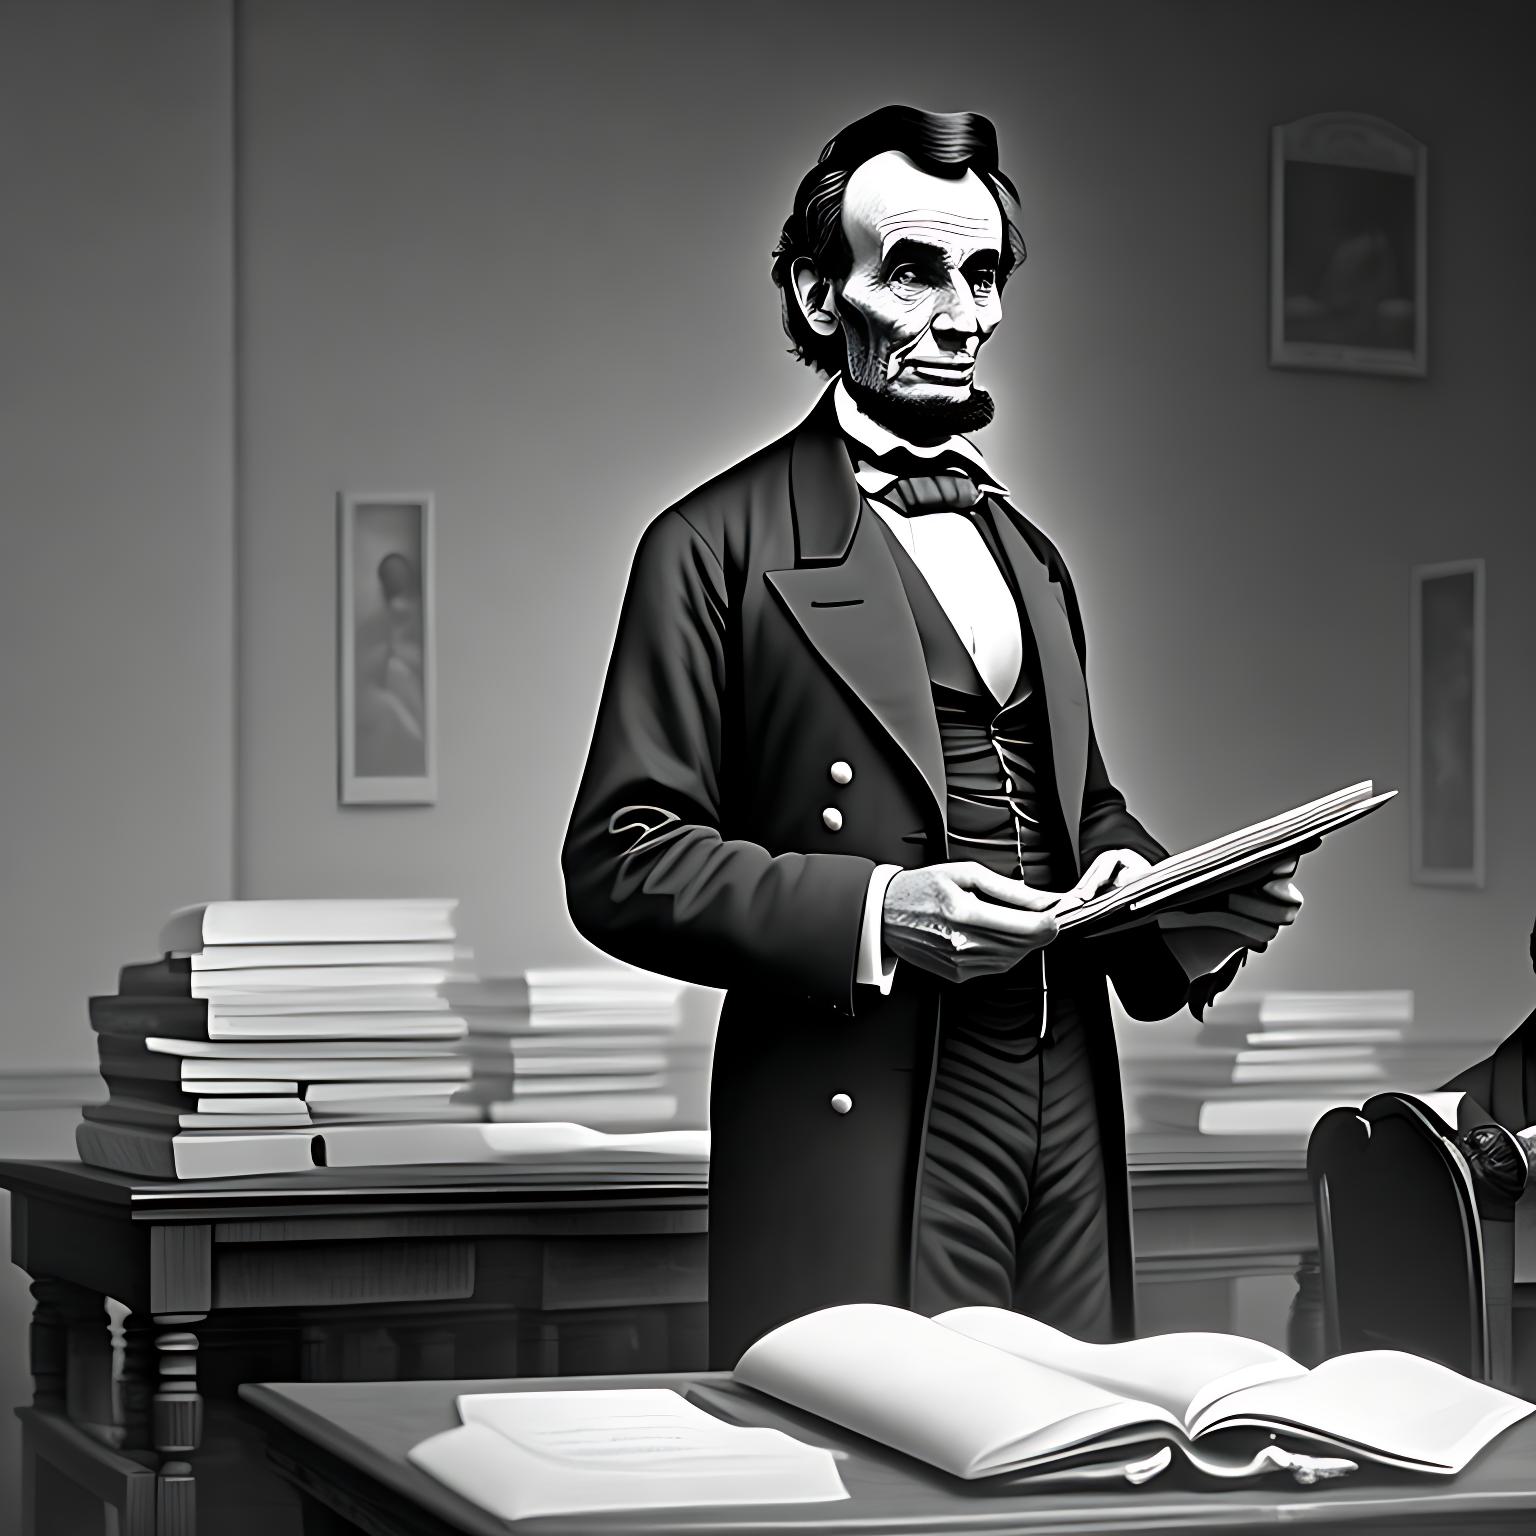 I asked ChatGPT to have Abraham Lincoln teach a class on how to use WordPress.com